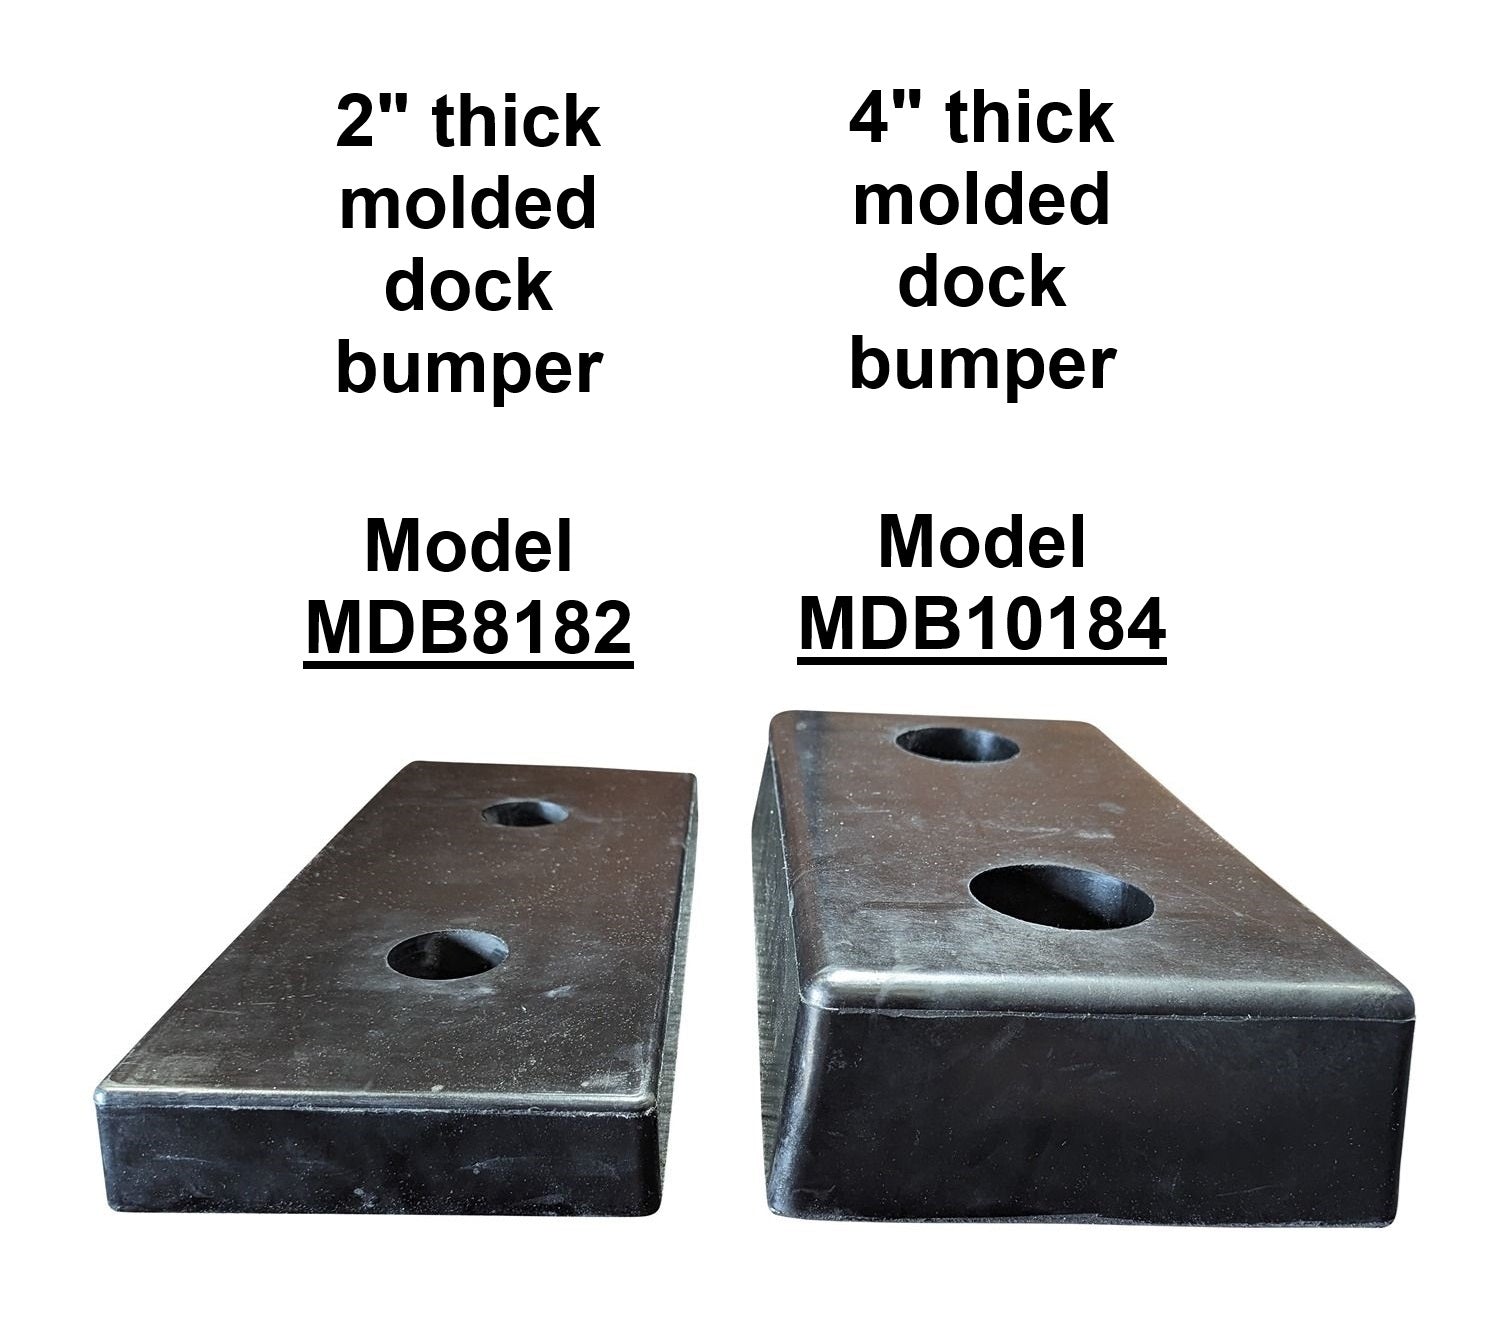 Molded dock bumper 2" compared to 4"